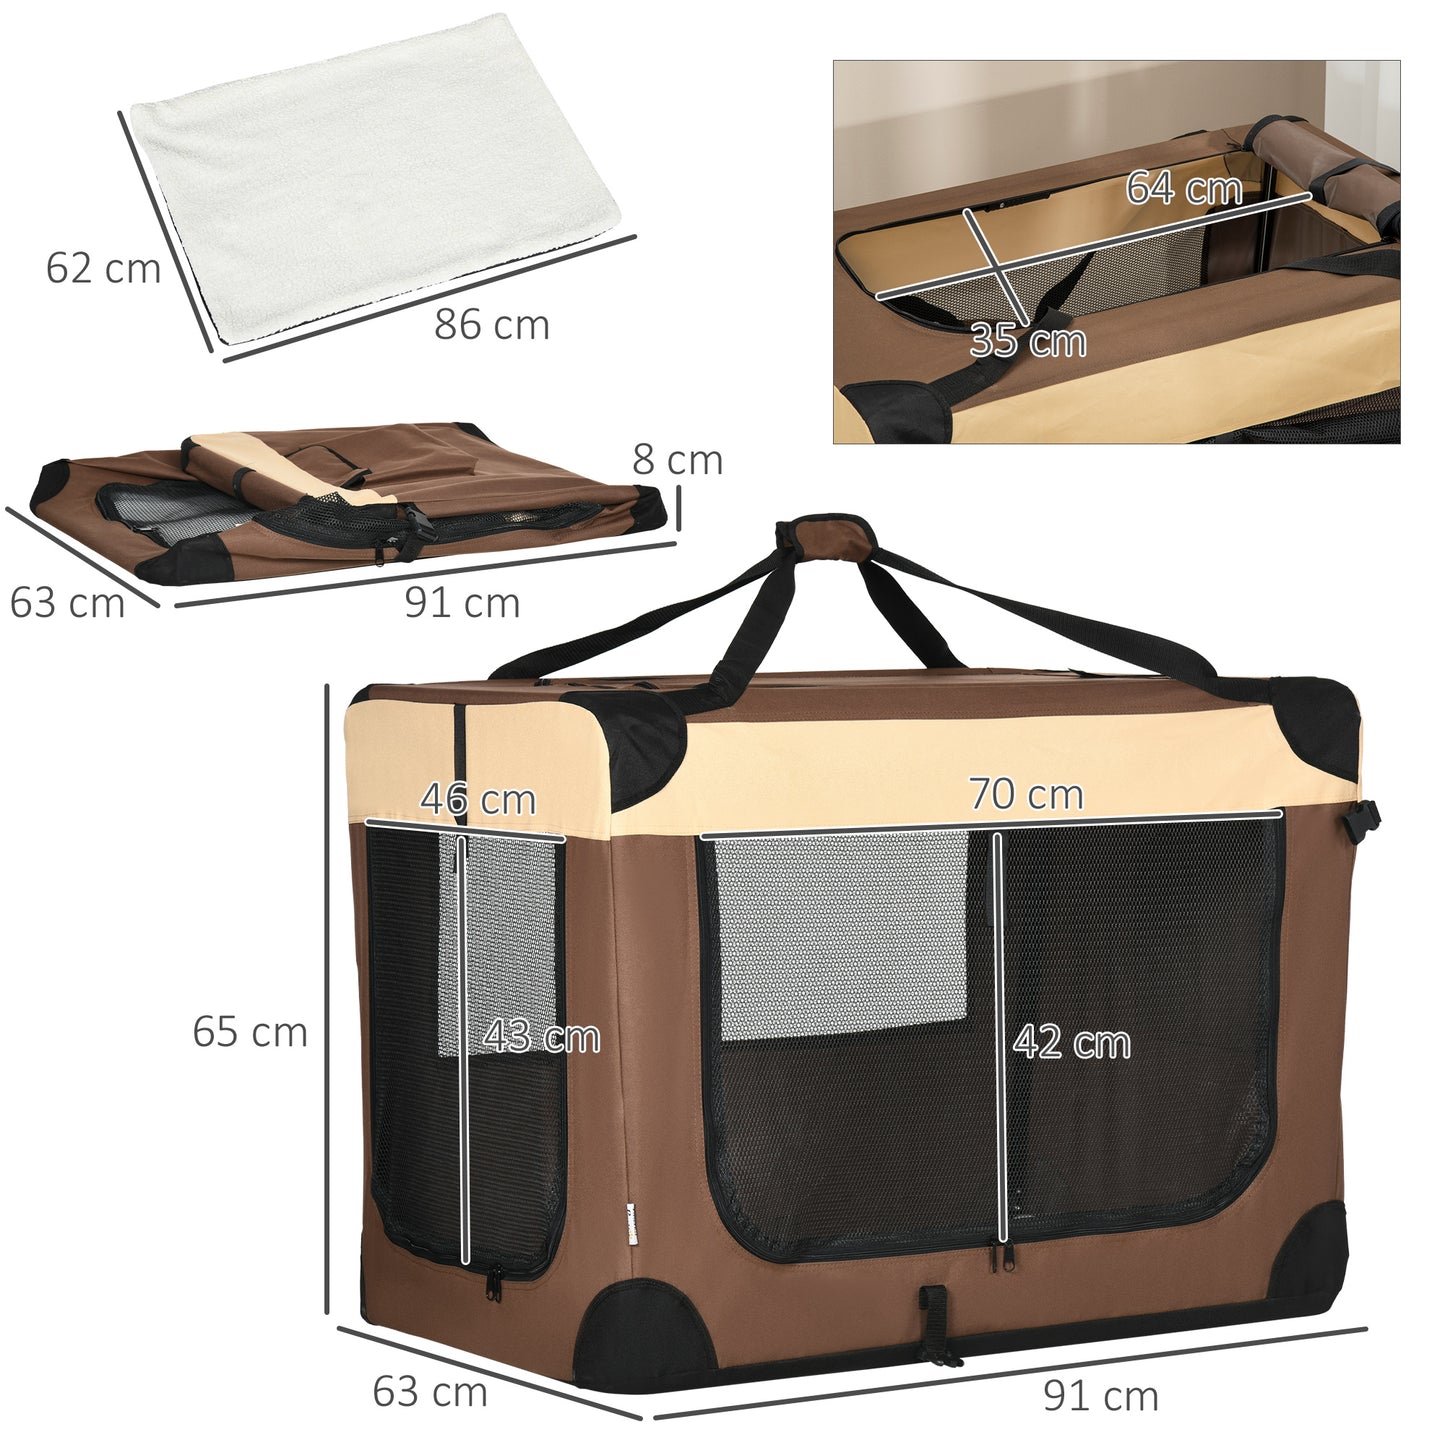 PawHut 91cm Foldable Pet Carrier, with Cushion, for Medium Dogs and Cats - Brown